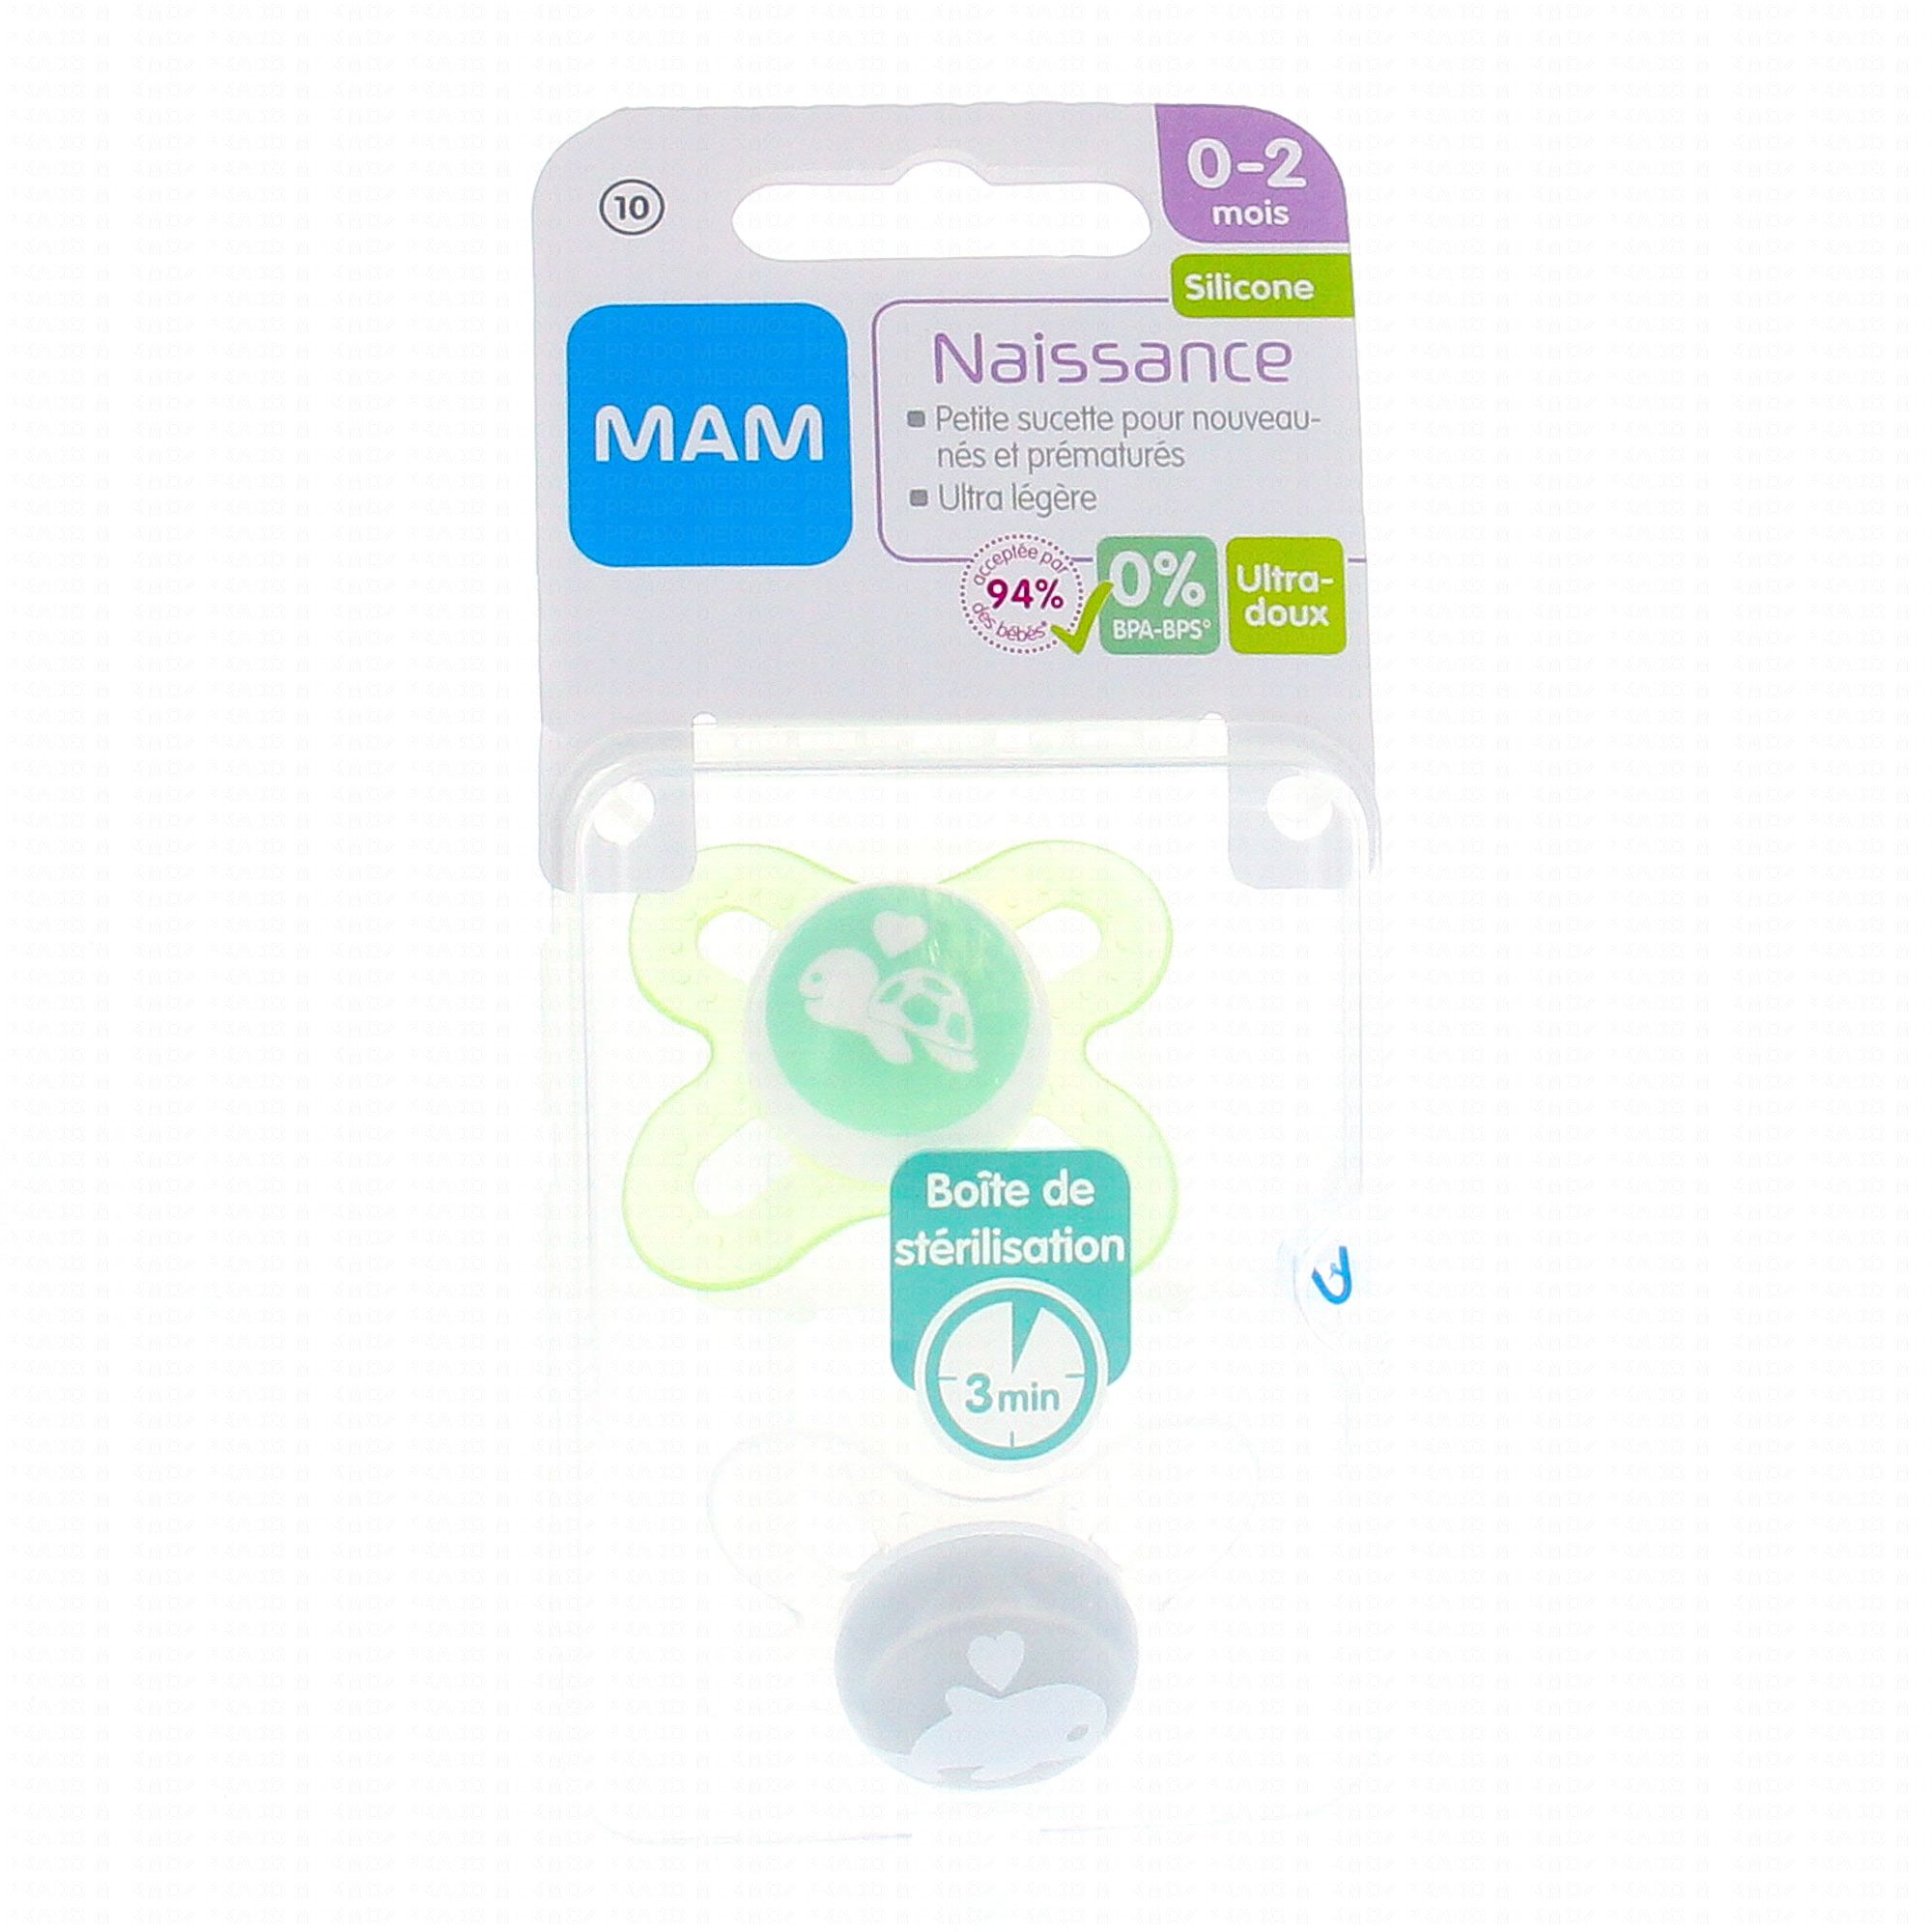 MAM Duo Sucettes silicone naissance 0-2 mois REF10 - Parapharmacie